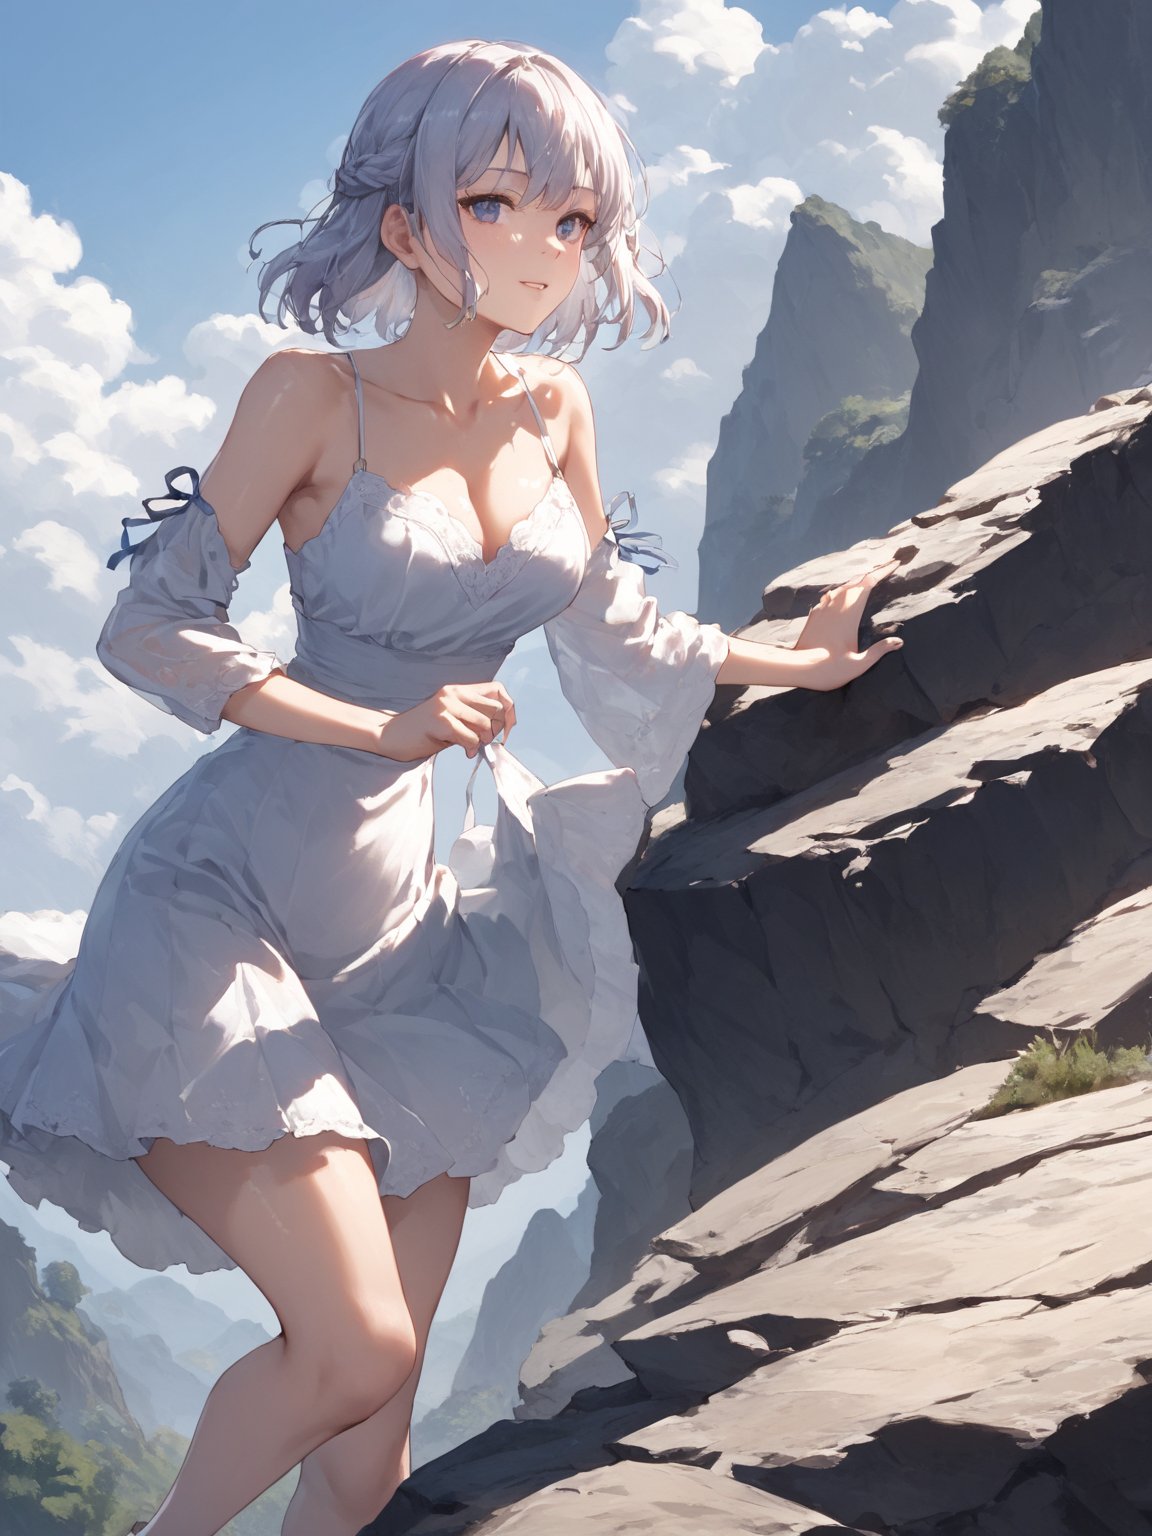 score_9,score_8_up,score_7_up,score_6_up, masterpiece, best quality, highres
,//Character, 
1girl, solo,SakayanagiArisu
,//Fashion, 

,//Background, 
,//Others, ,Expressiveh,
The girl climbing a steep, rocky cliff face. Her dress is slightly torn, and her hair is windswept. She's reaching for a handhold, determination evident on her face. Dark storm clouds gather in the background, adding drama to the scene.